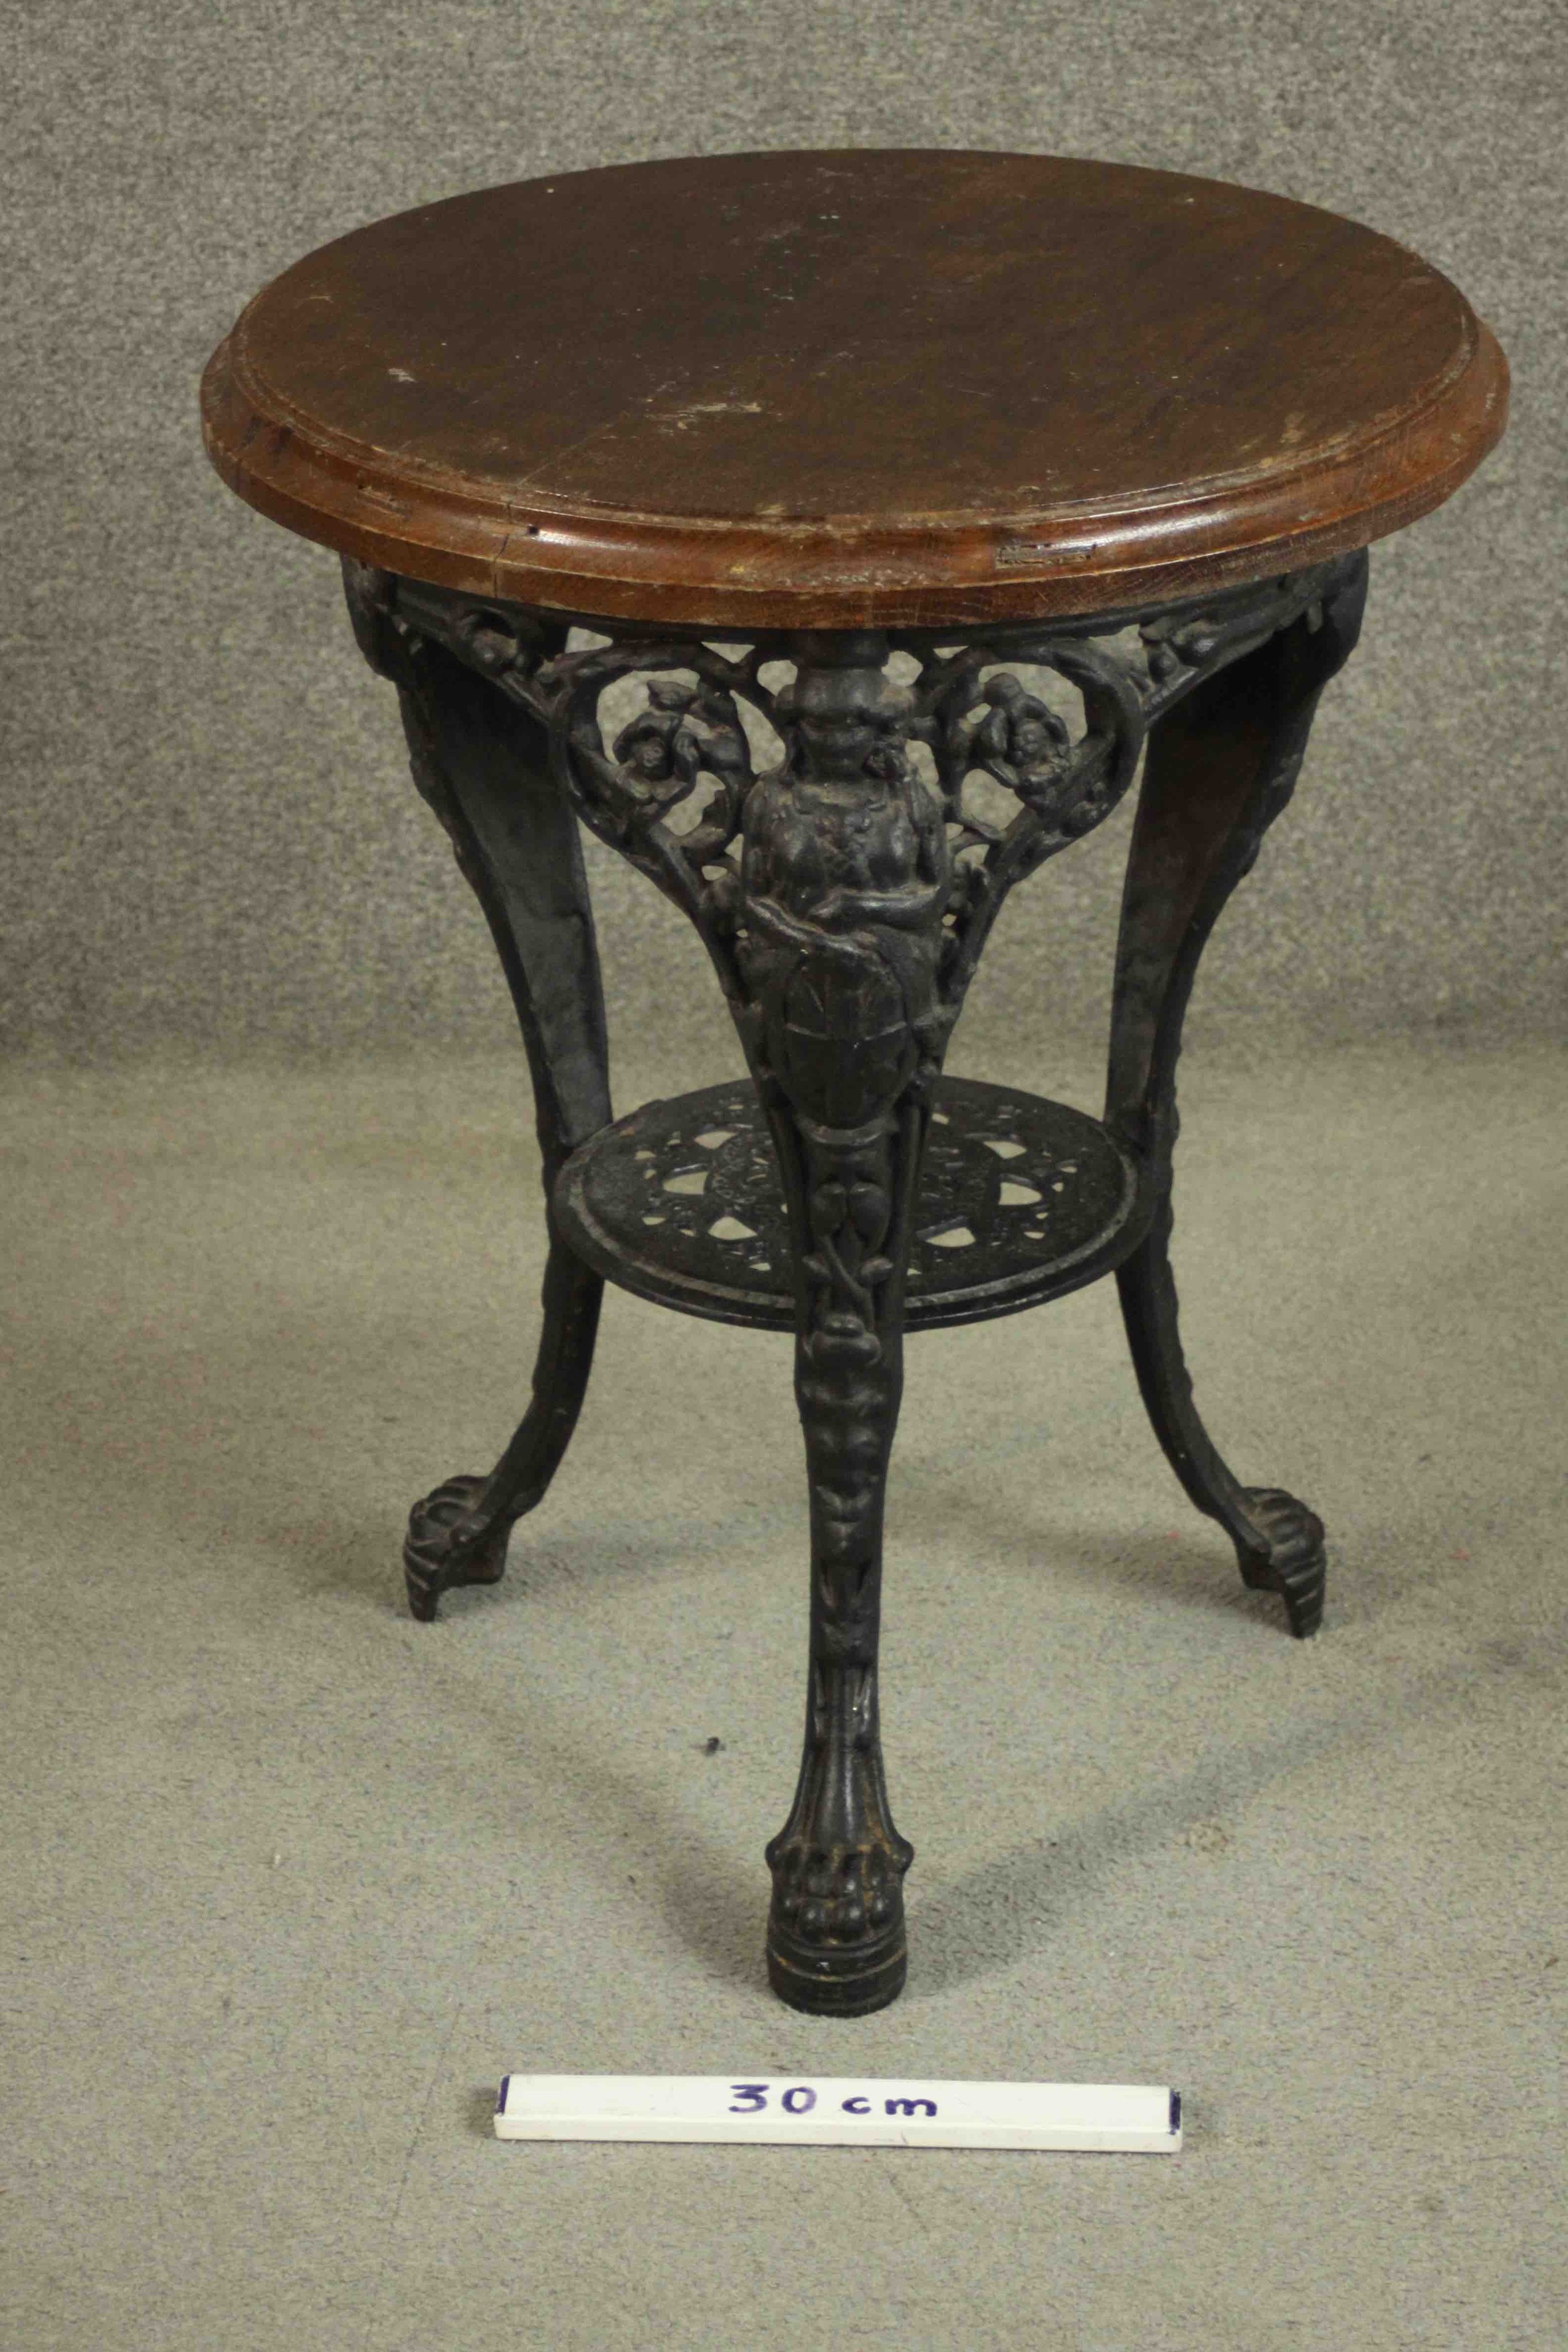 A black painted Victorian cast iron pub table with a circular oak top on three curved legs joined by - Image 2 of 4